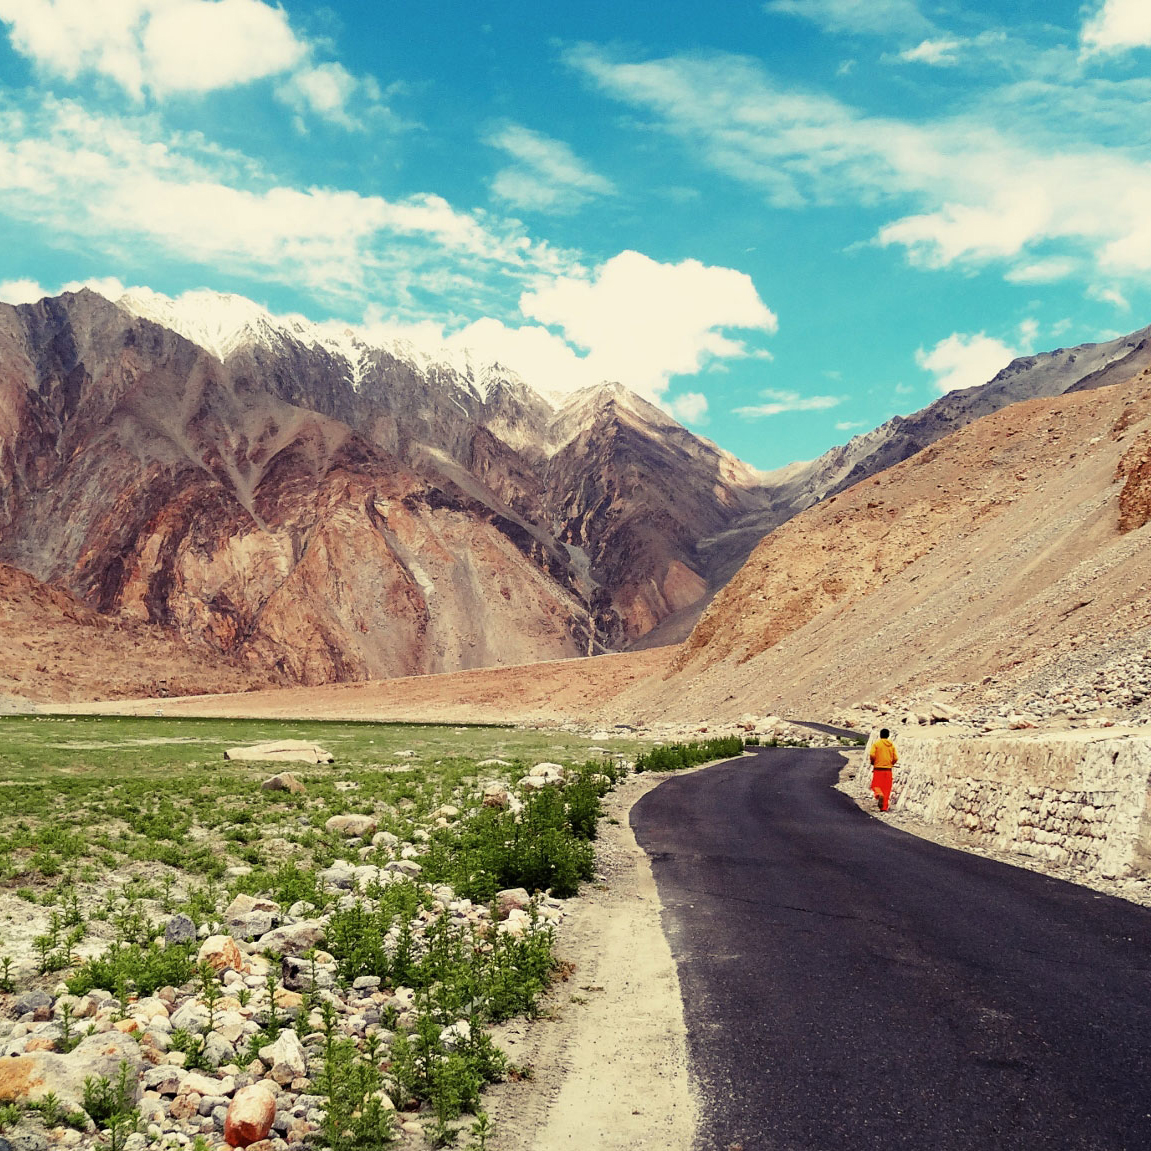 Ladakh: A Spirit of Place image of person walking along a road with mountains